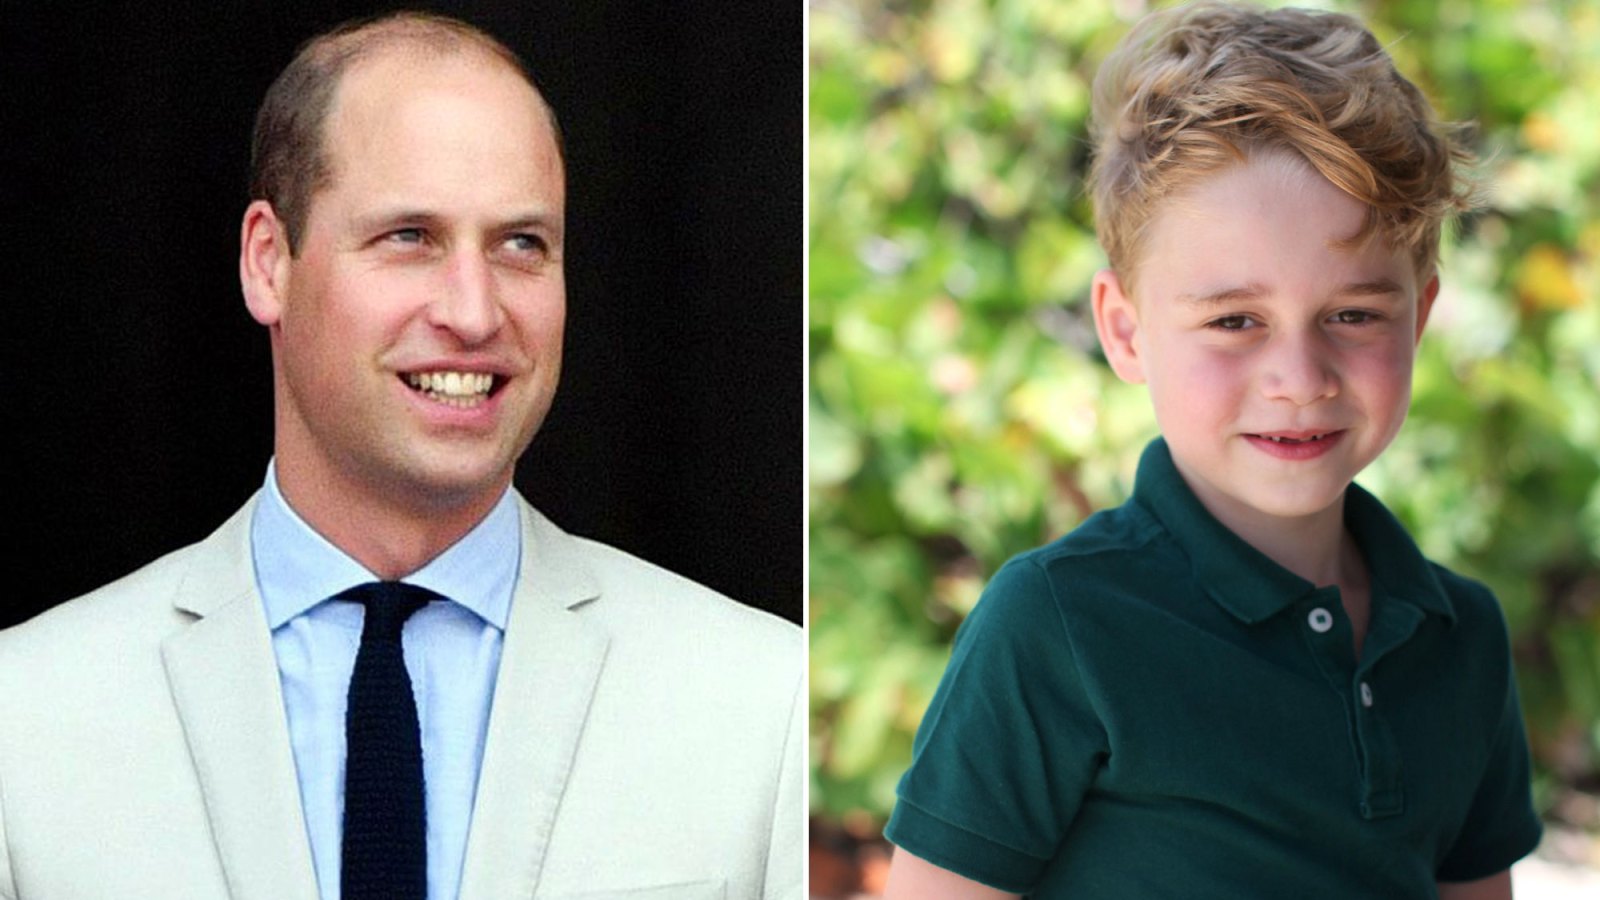 Prince William Shares That Prince George Is 'Obsessed' With Tractors